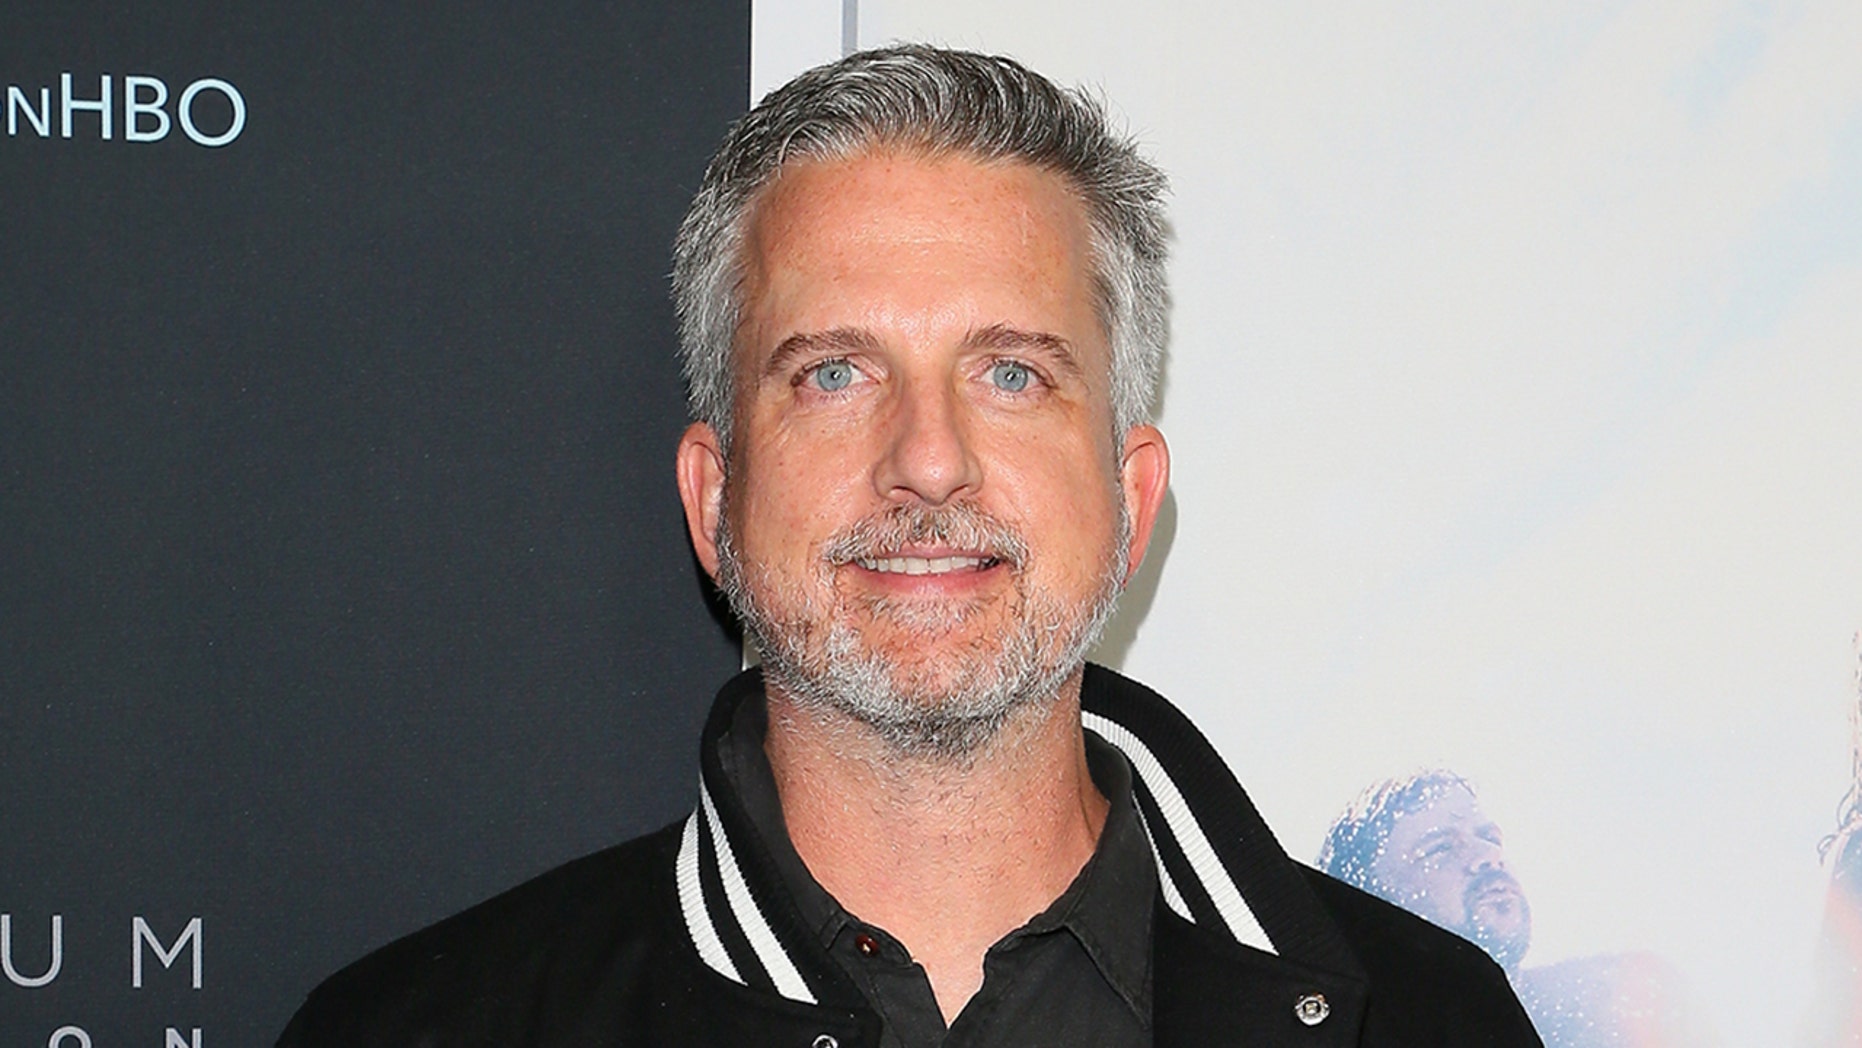 Ex-ESPN star Bill Simmons calls out network for editing him from Adam ...